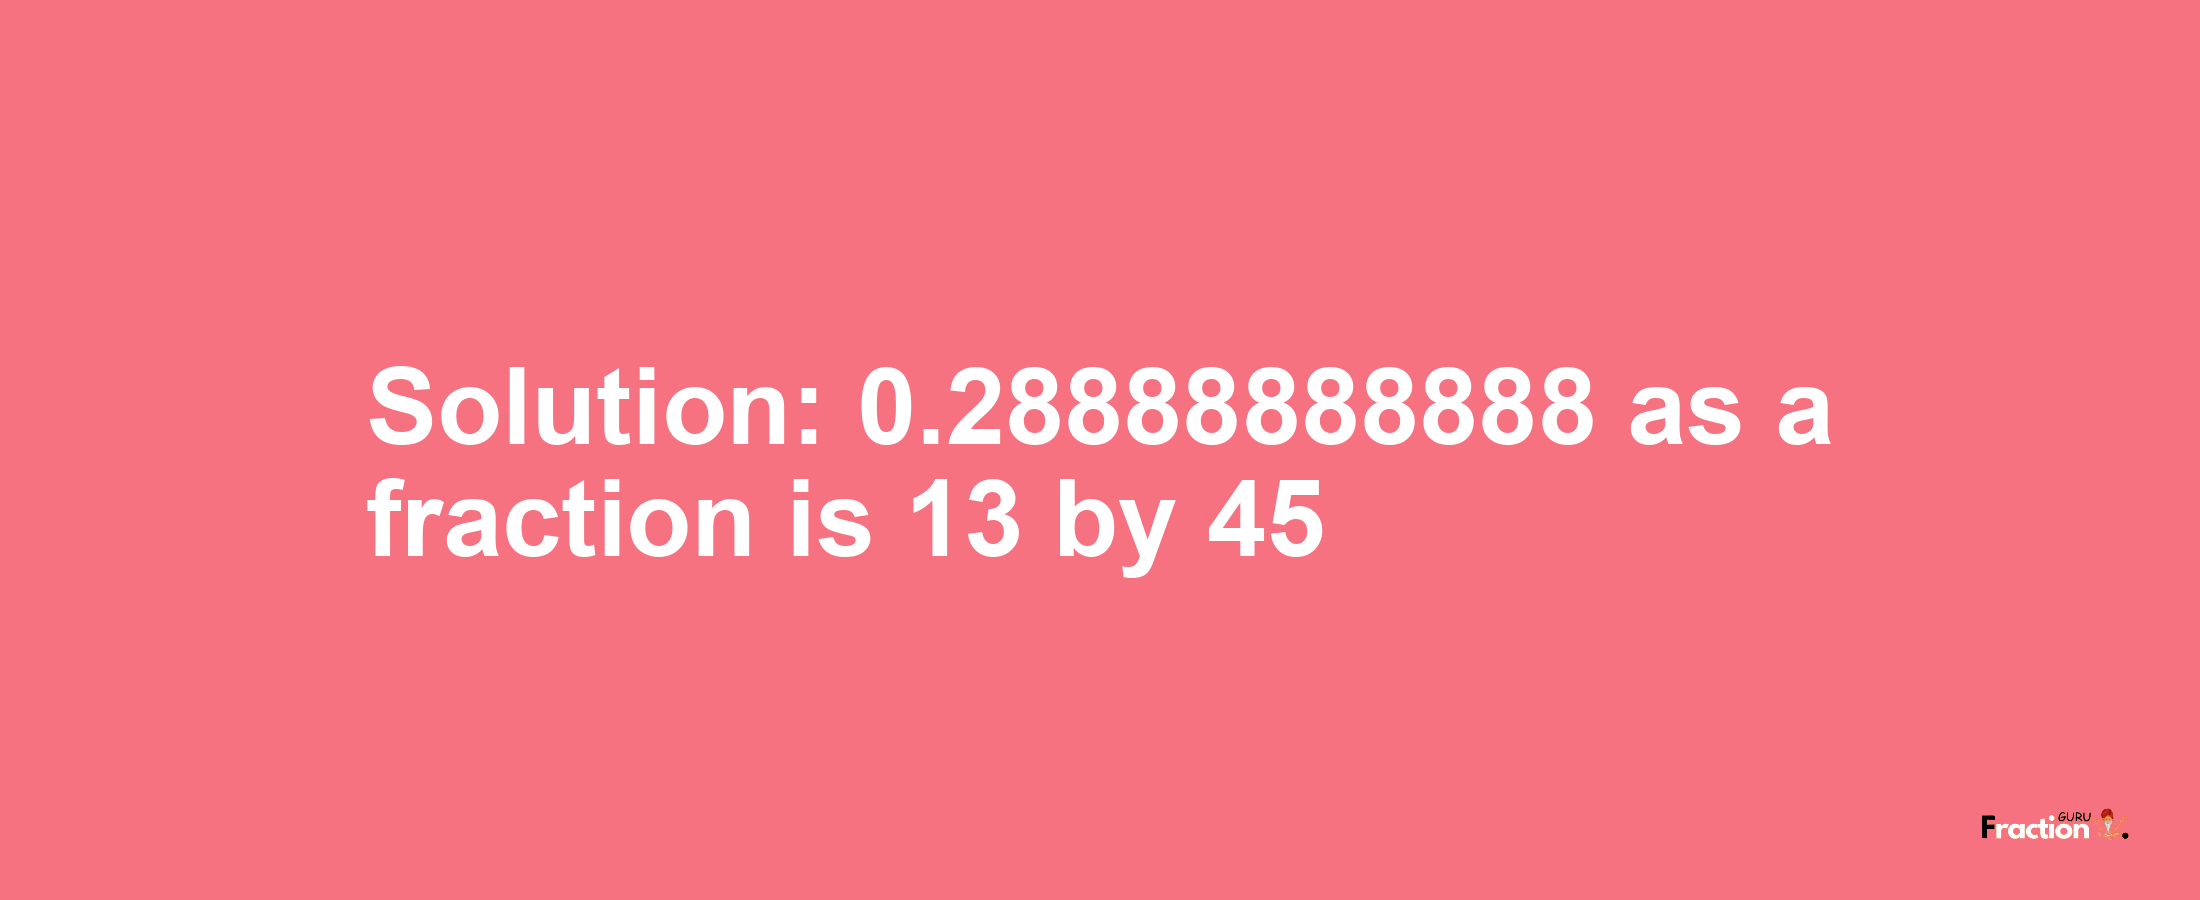 Solution:0.28888888888 as a fraction is 13/45